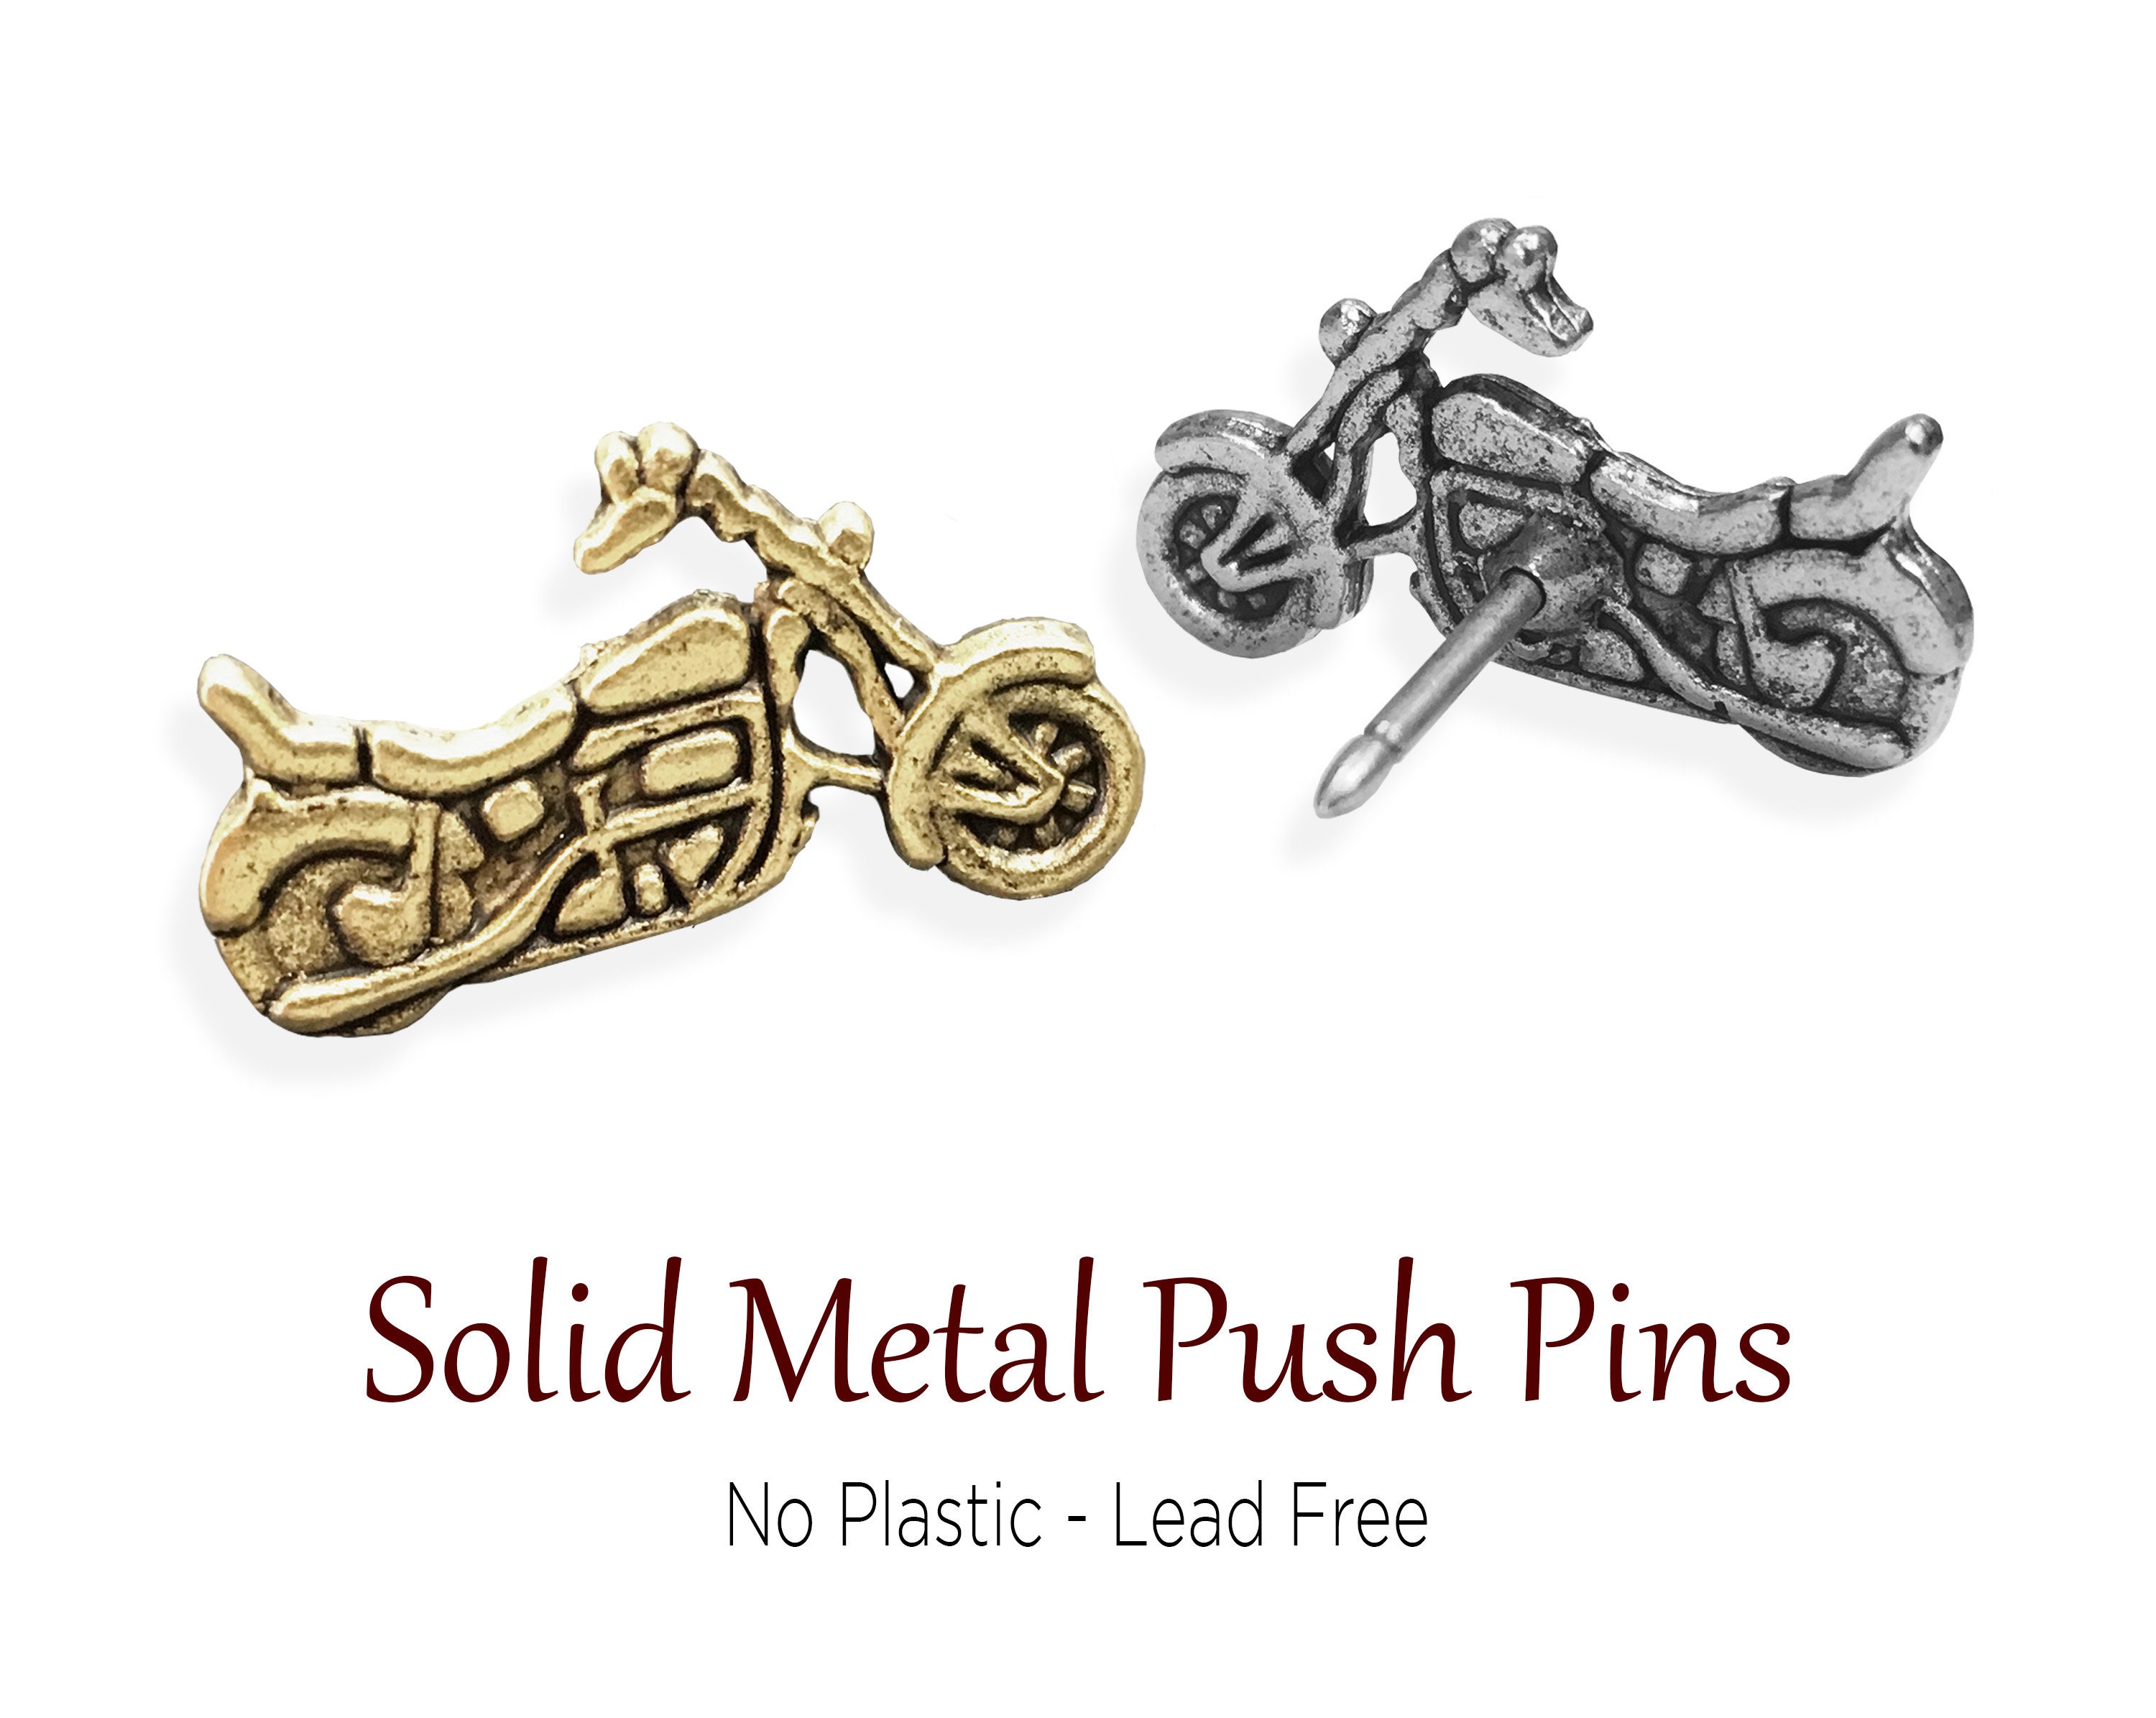 Pin on Motorcycles